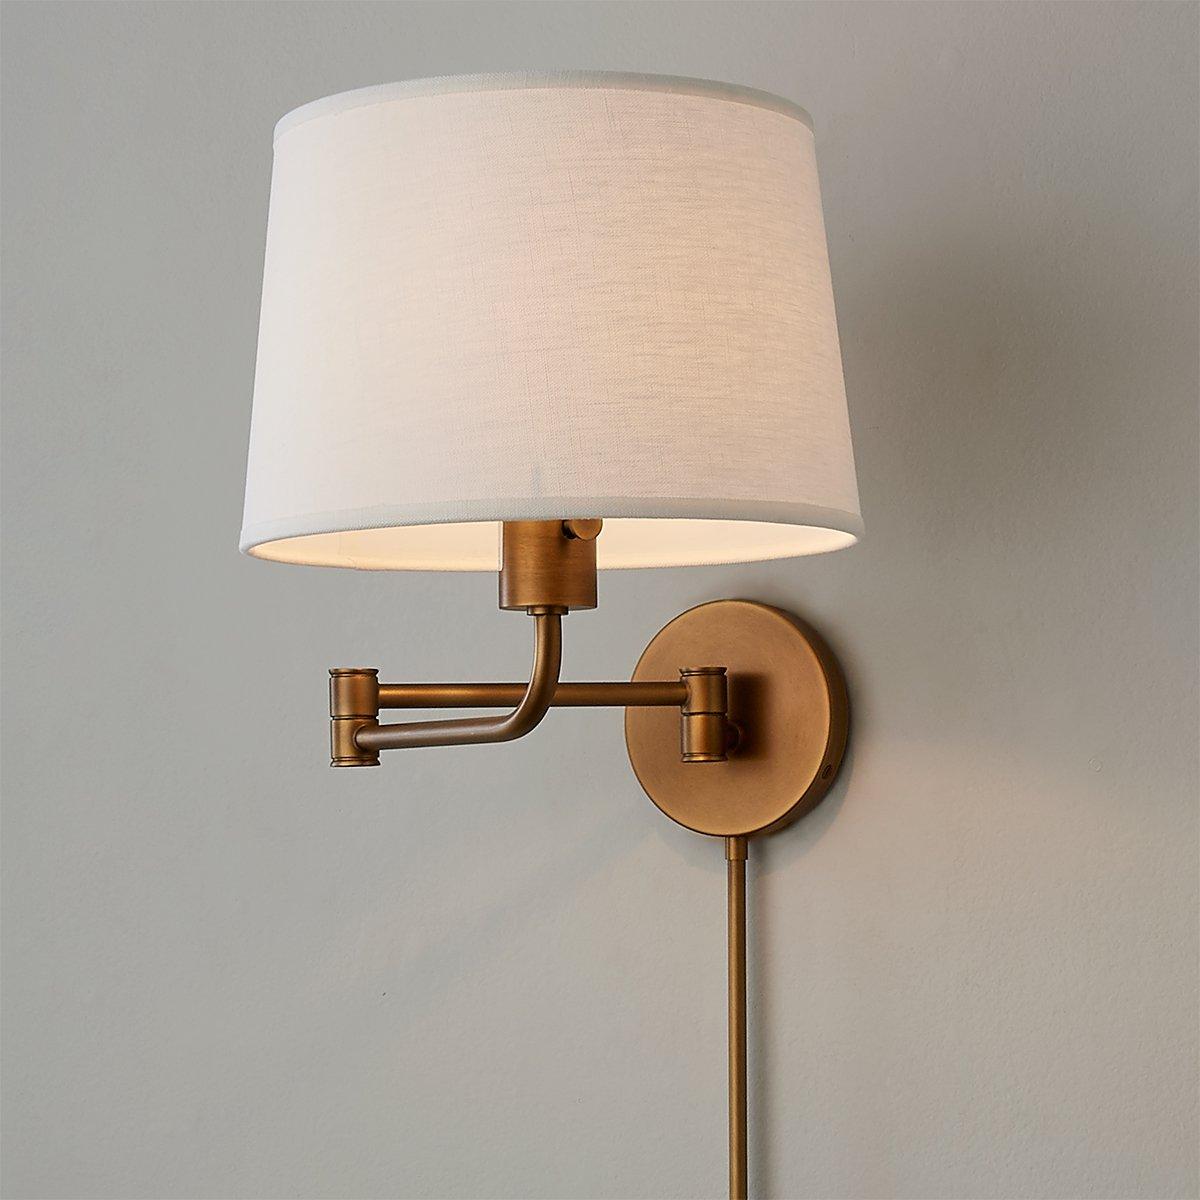 Castell Curved Arm LED Wall Sconce, Aged Brass, Wall